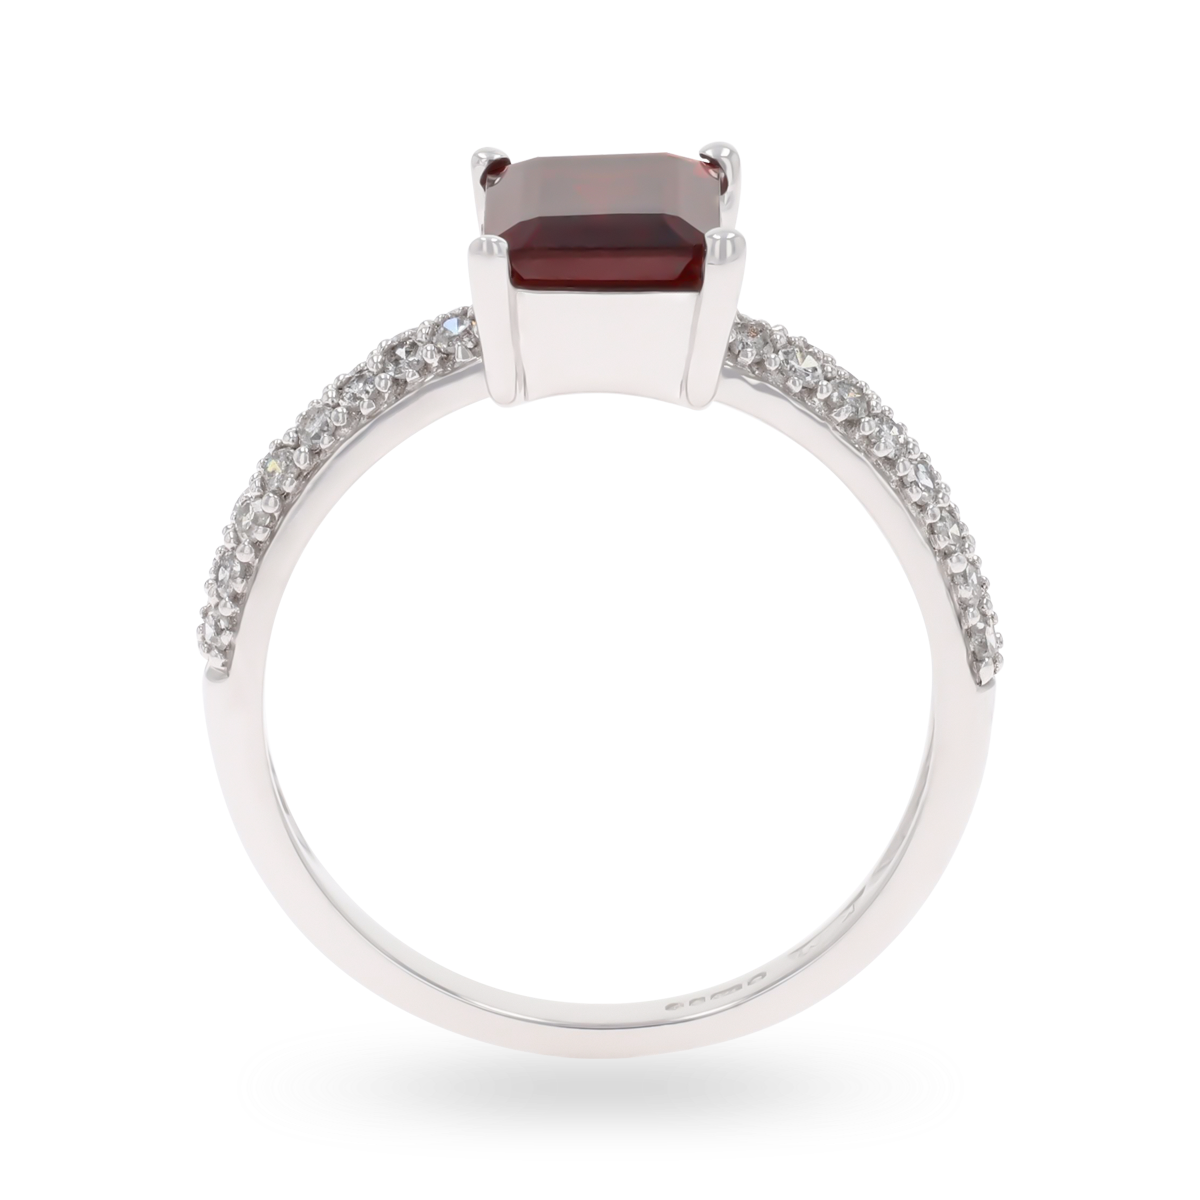 9ct White Gold Emerald Cut Garnet Solitaire Ring With Diamond Shoulders